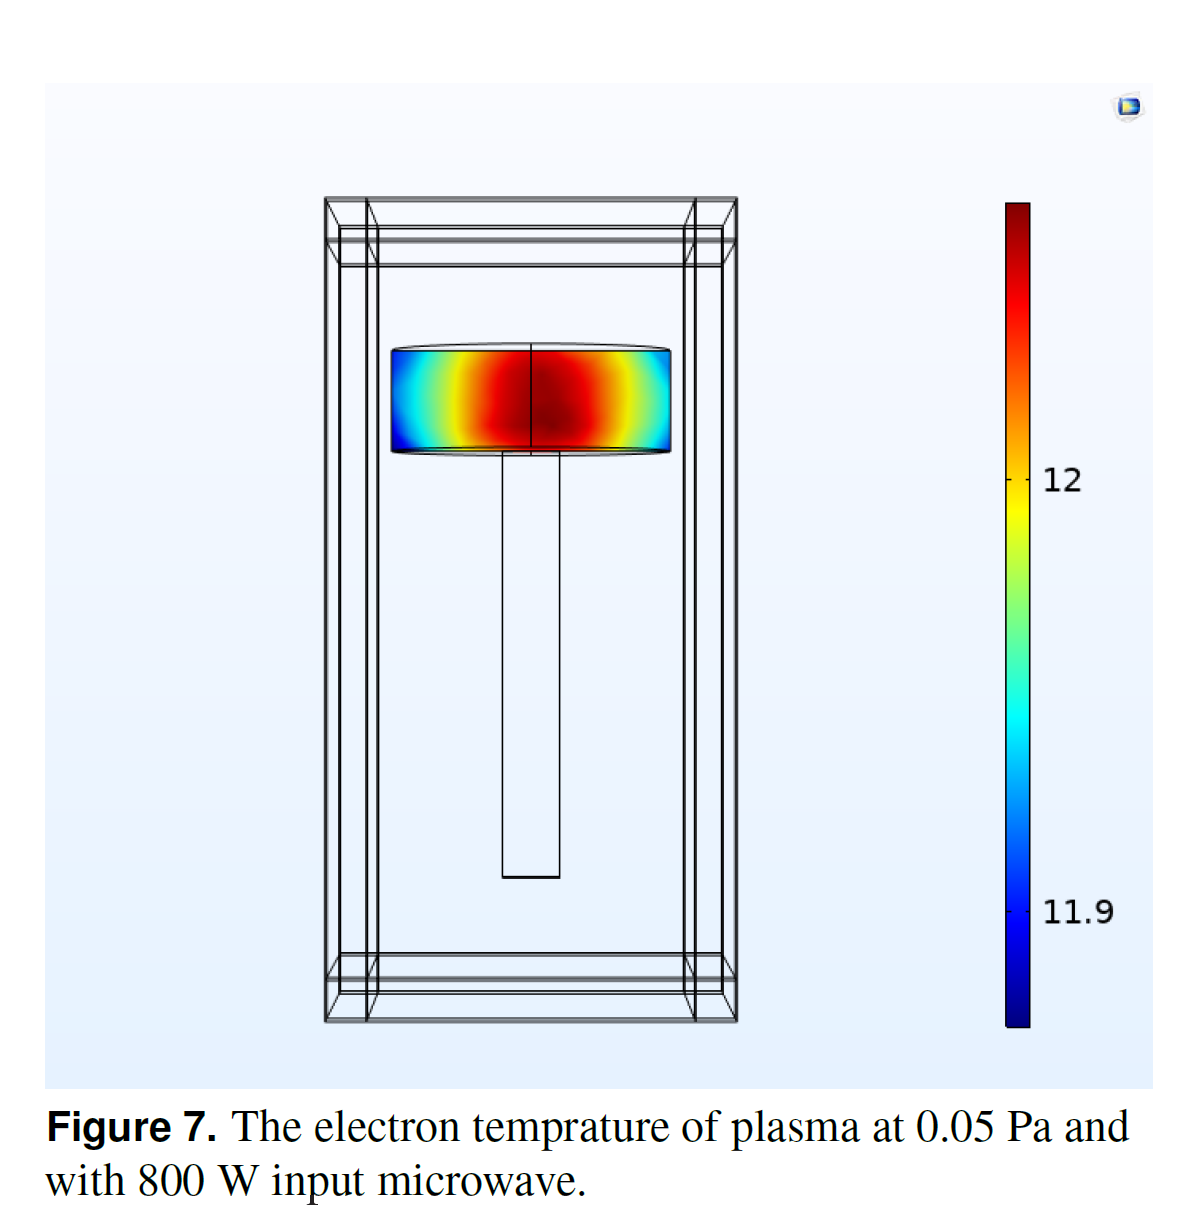 Figure 7. The electron temprature of plasma at 0.05 Pa and with 800 W input microwave